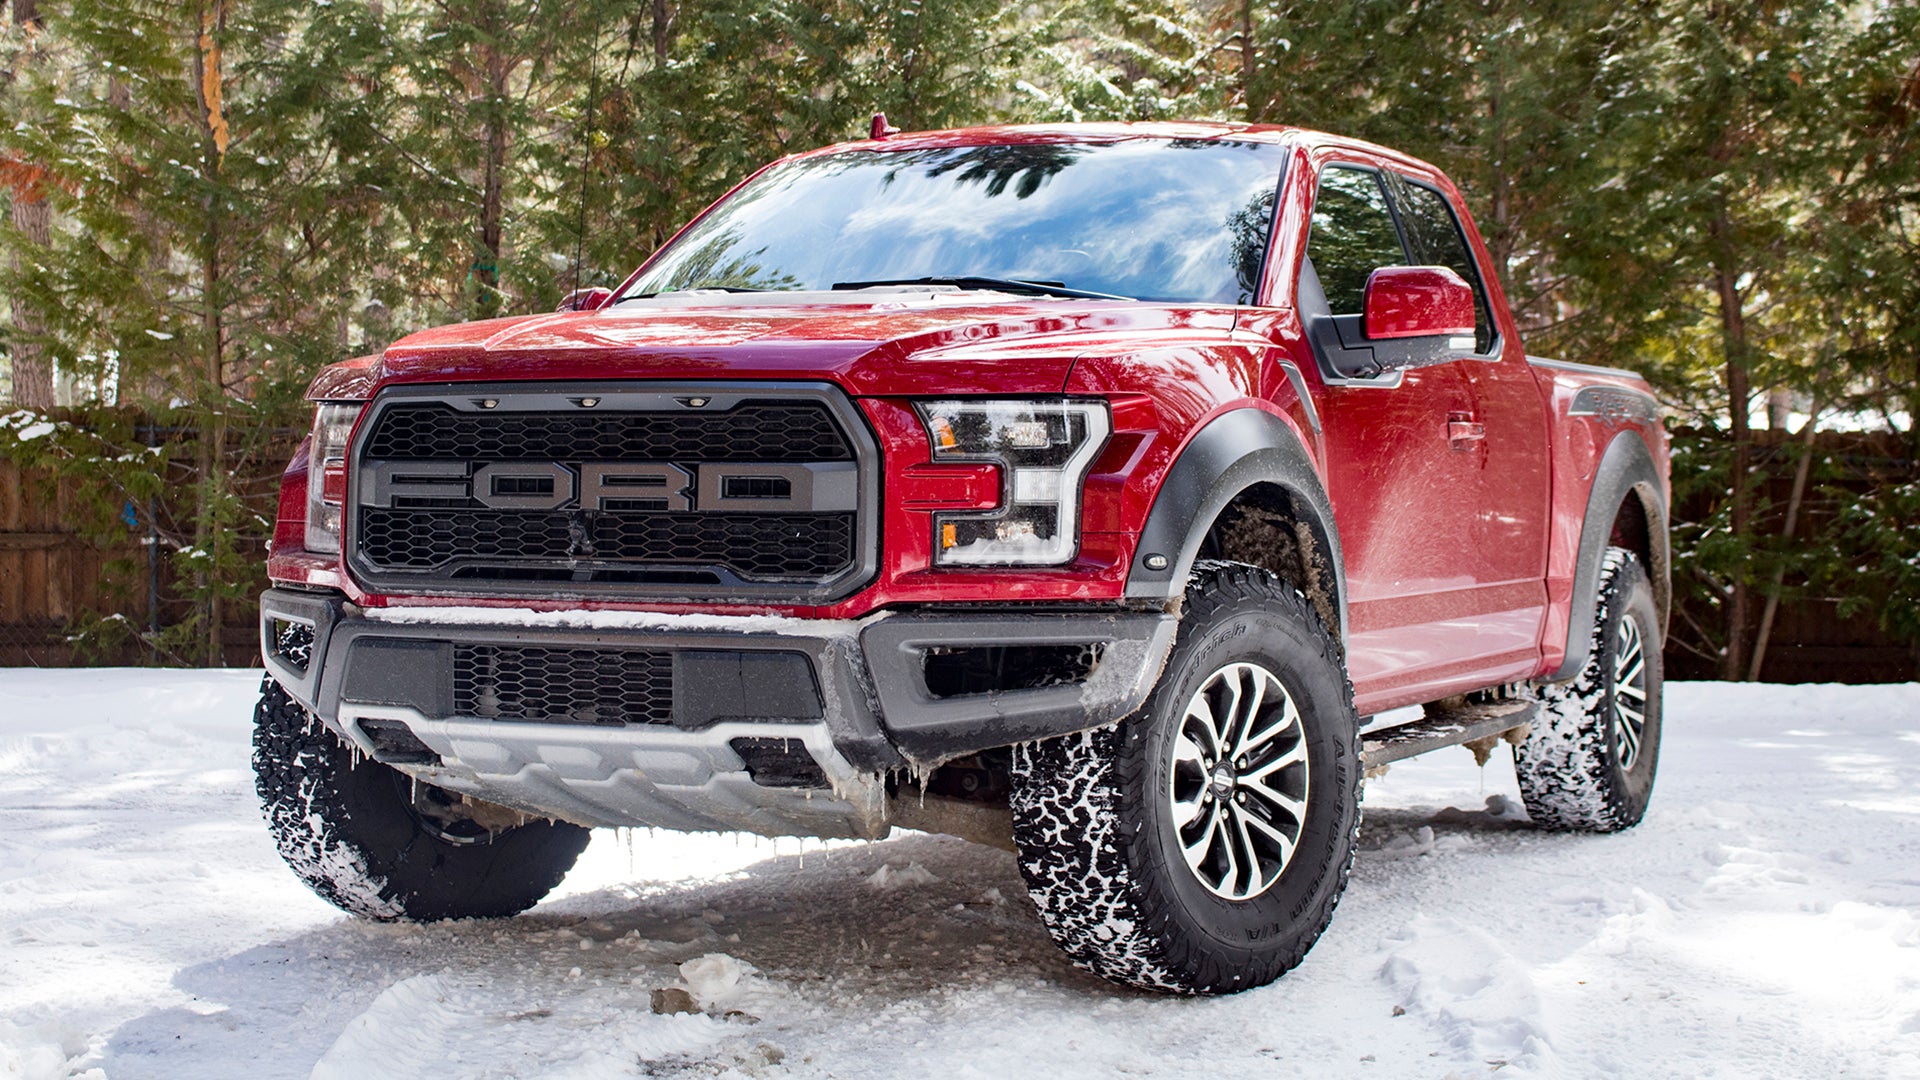 2019 Ford F-150 review: Popular pickup keeps on truckin' - CNET